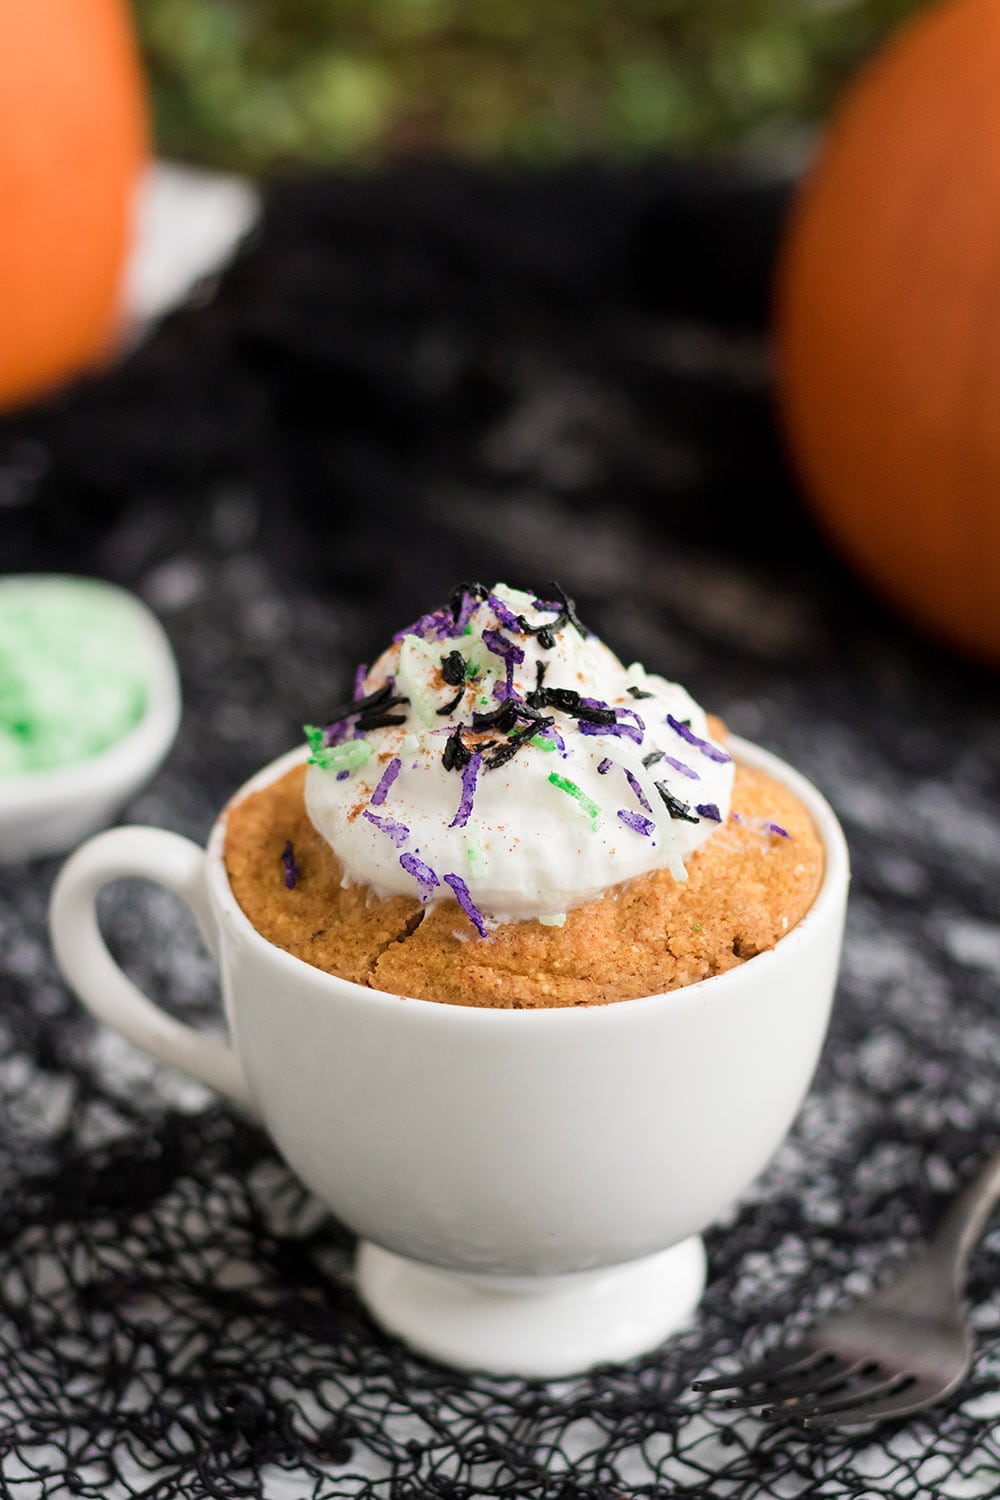 Pumpkin cake in a mug topped with Halloween colored coconut shreds.